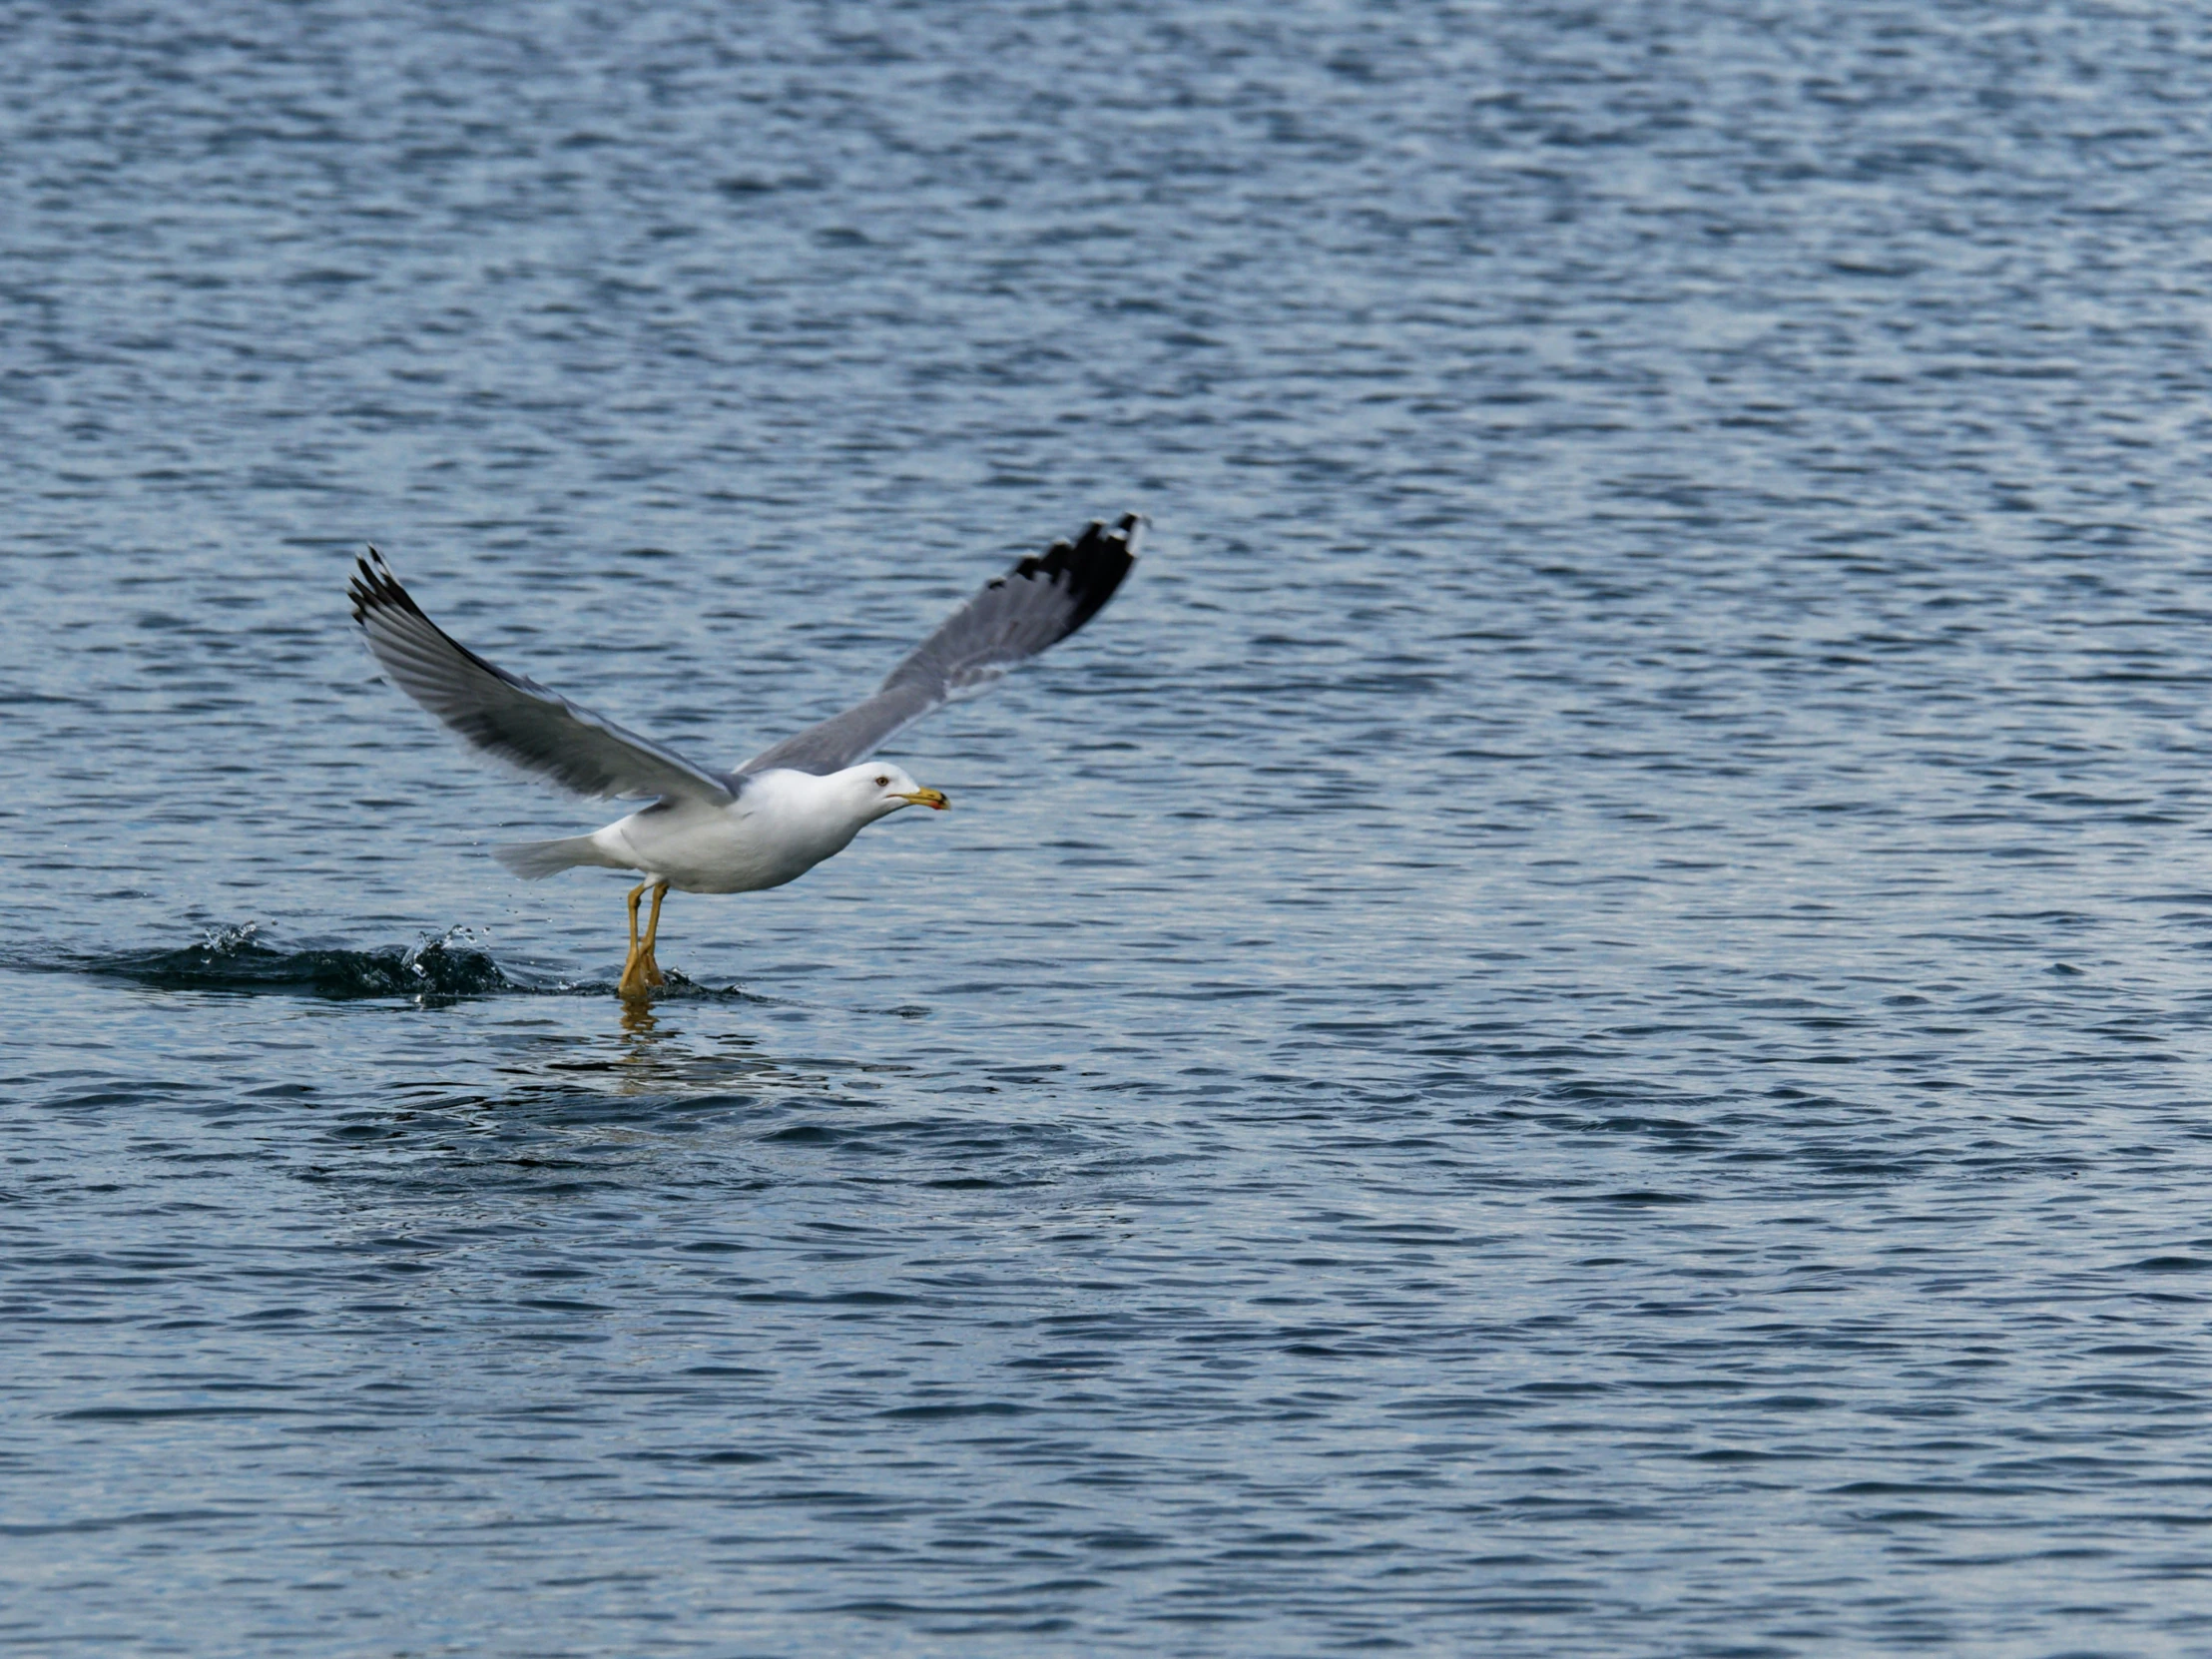 a bird flying over the ocean in front of the water